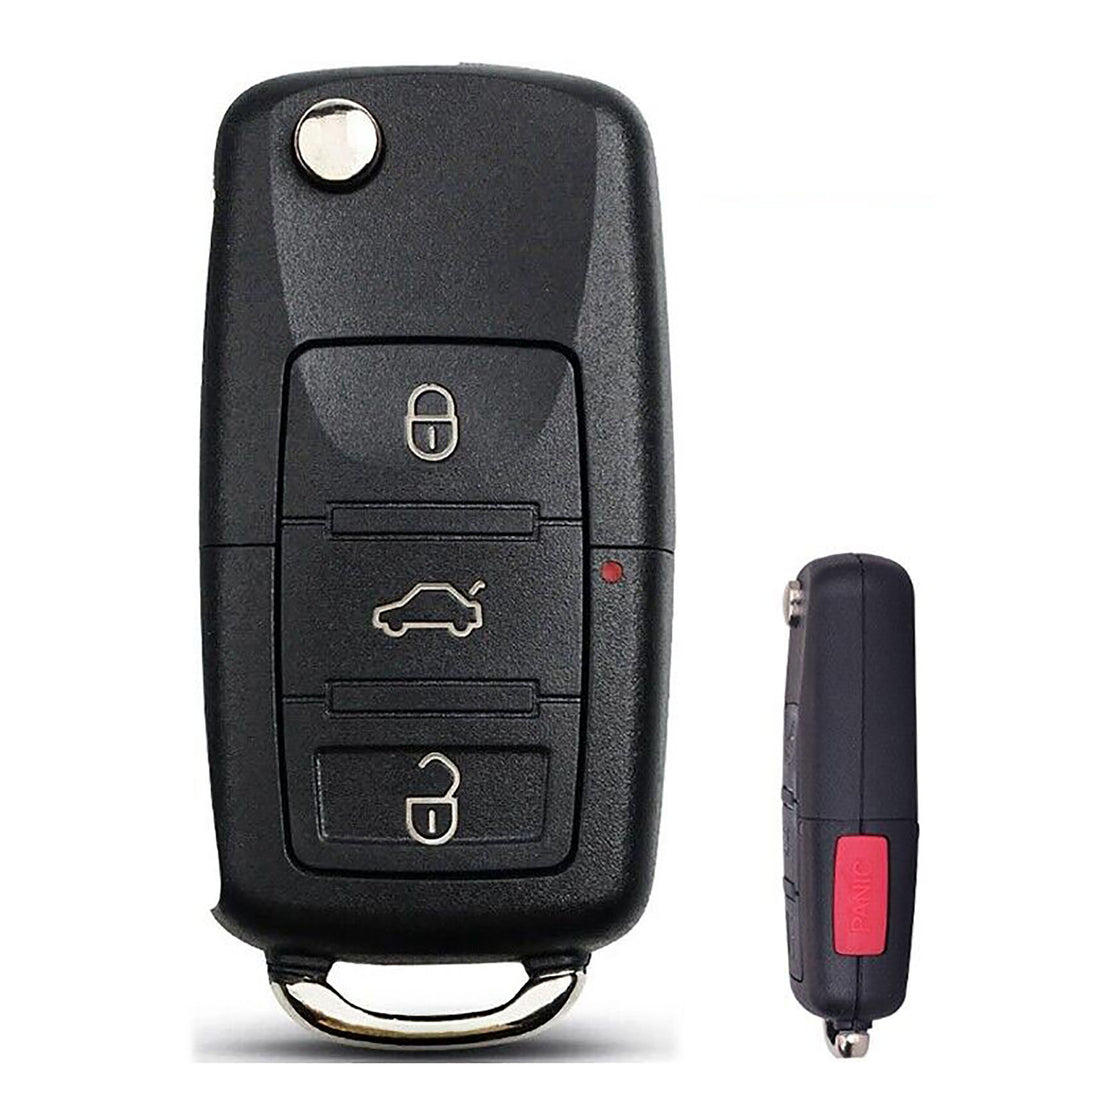 1x New Quality Replacement Key Fob Remote Compatible with & Fit For Volkswagen VW Vehicles - MPN NBG92596263-02